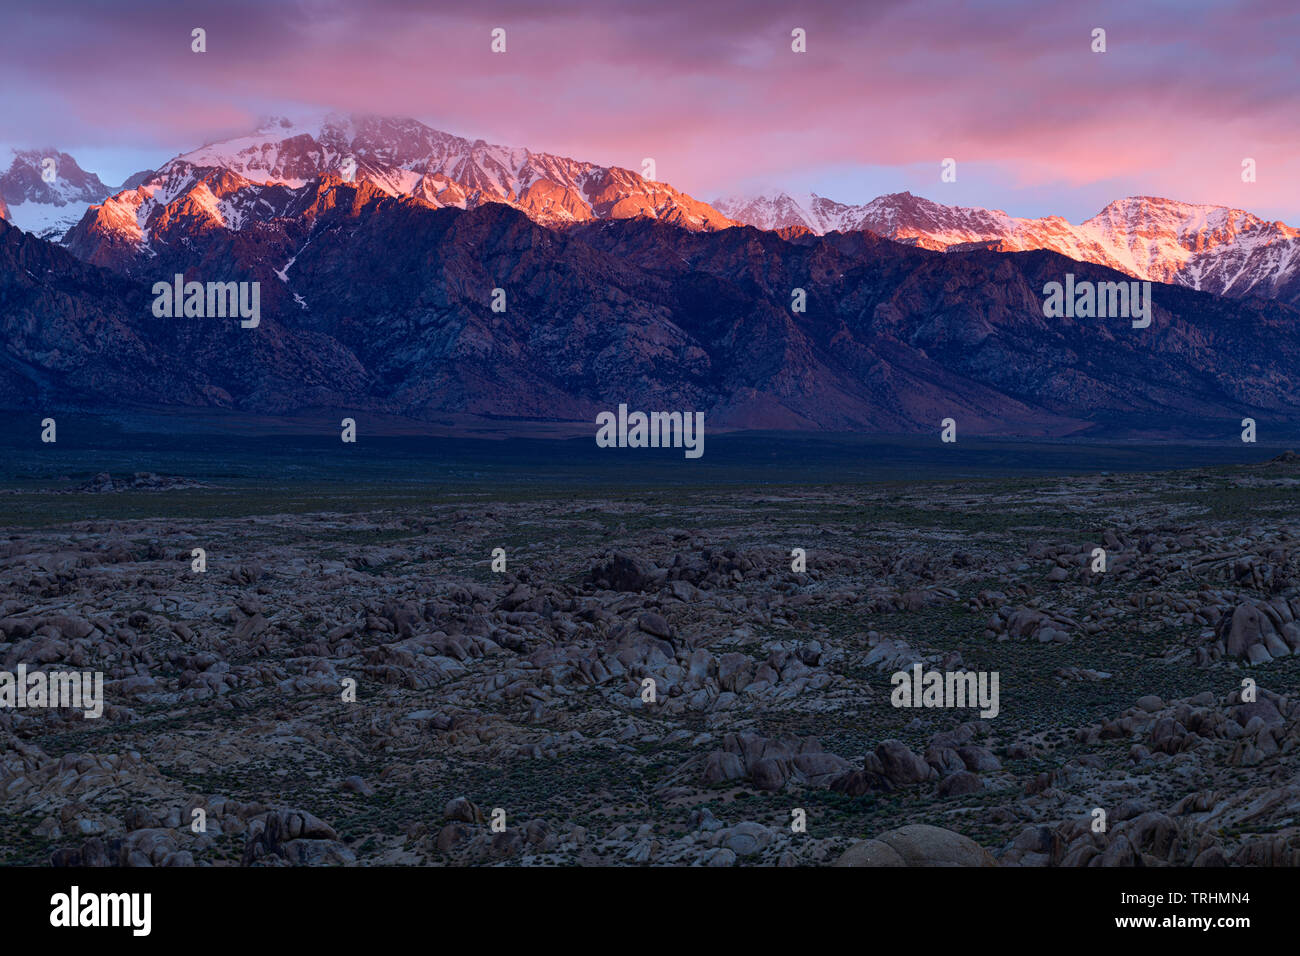 Dramatic sunrise at the Alabama Hills near Lone Pine, California just below Mt. Whitney in the Eastern Sierra's. Stock Photo